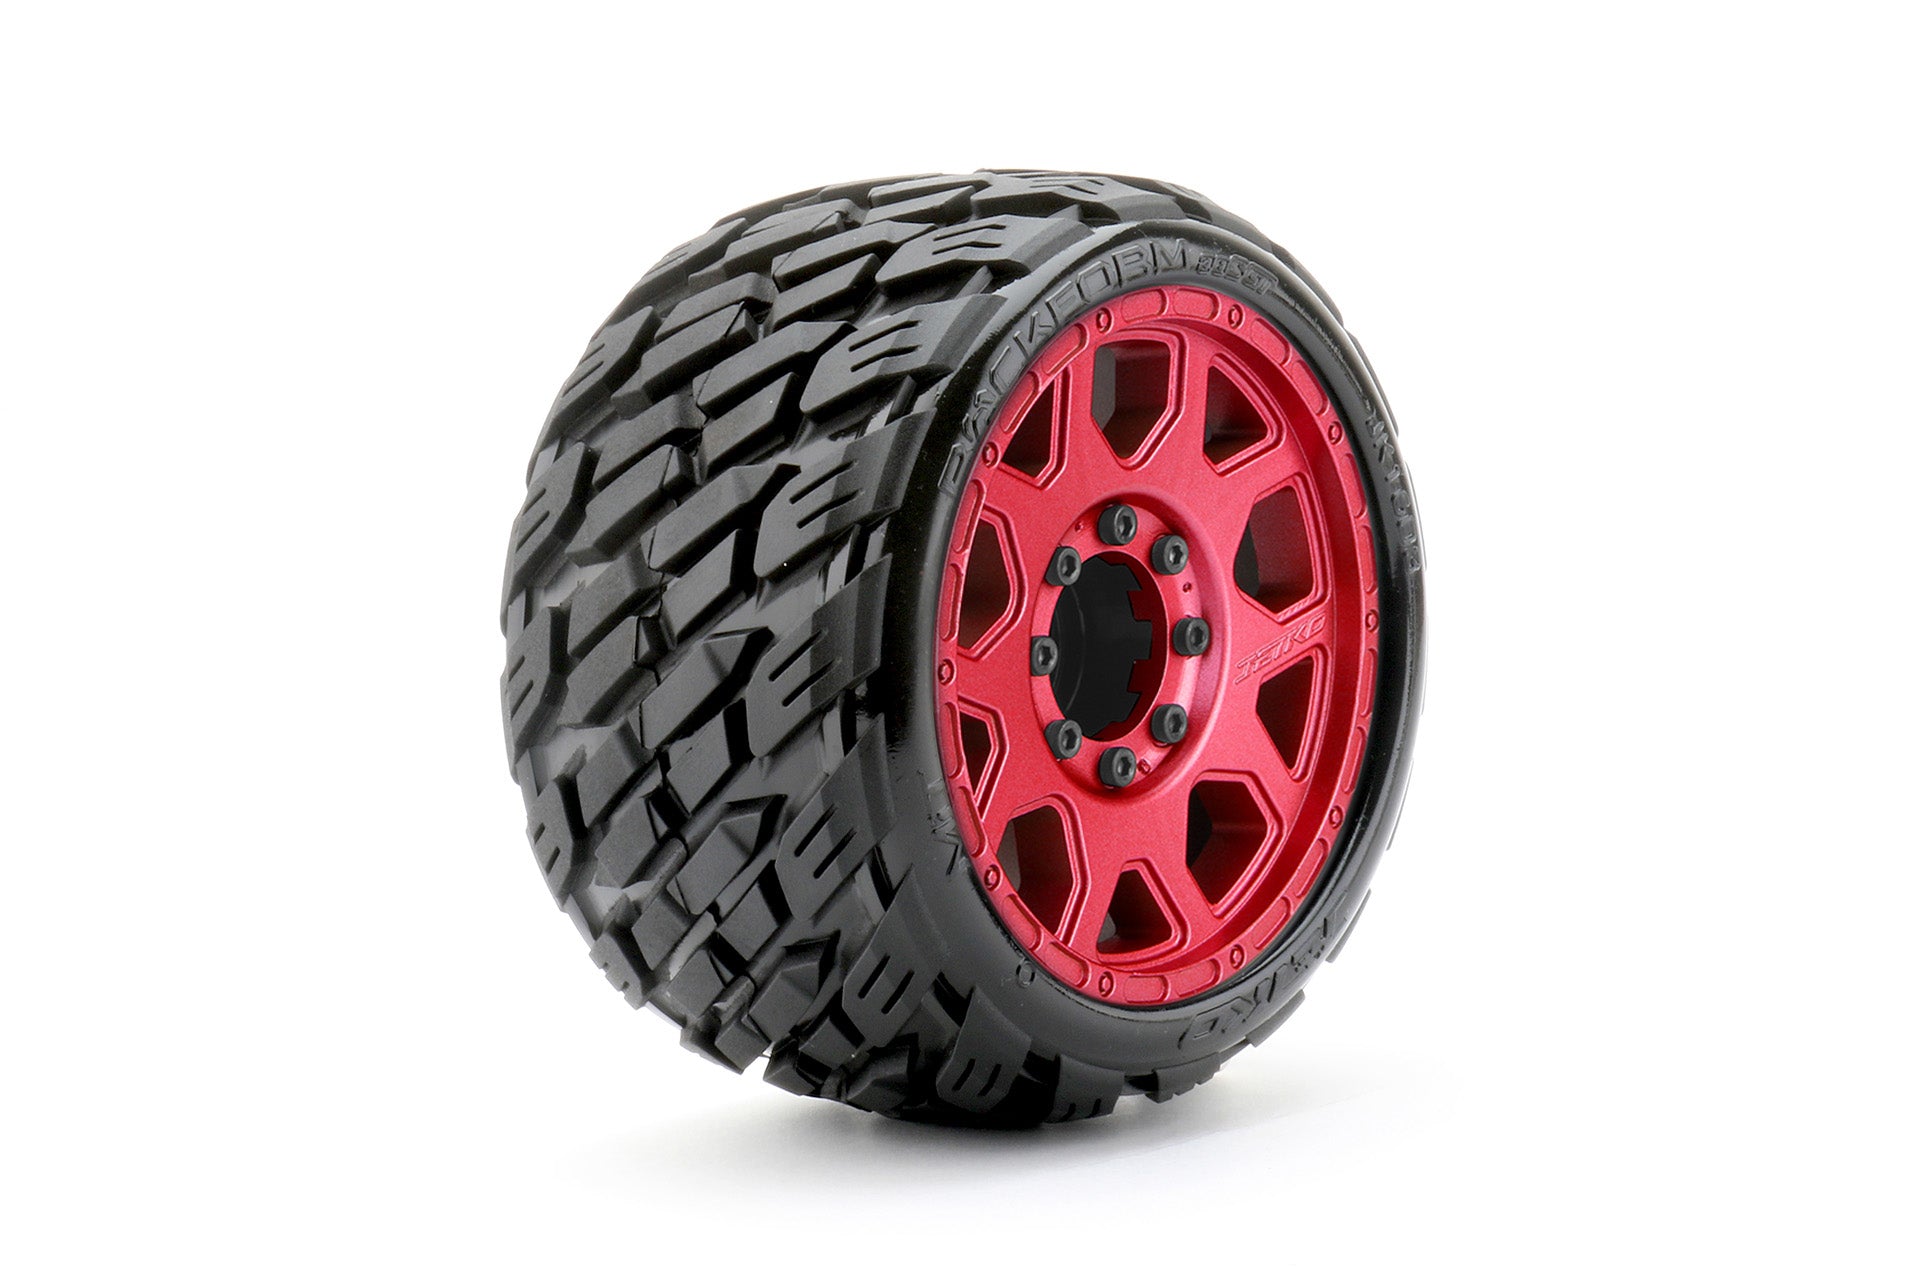 1/8 SGT 3.8 EX-Rockform, Mounted on Metal Red Claw Rim, - Dirt Cheap RC SAVING YOU MONEY, ONE PART AT A TIME